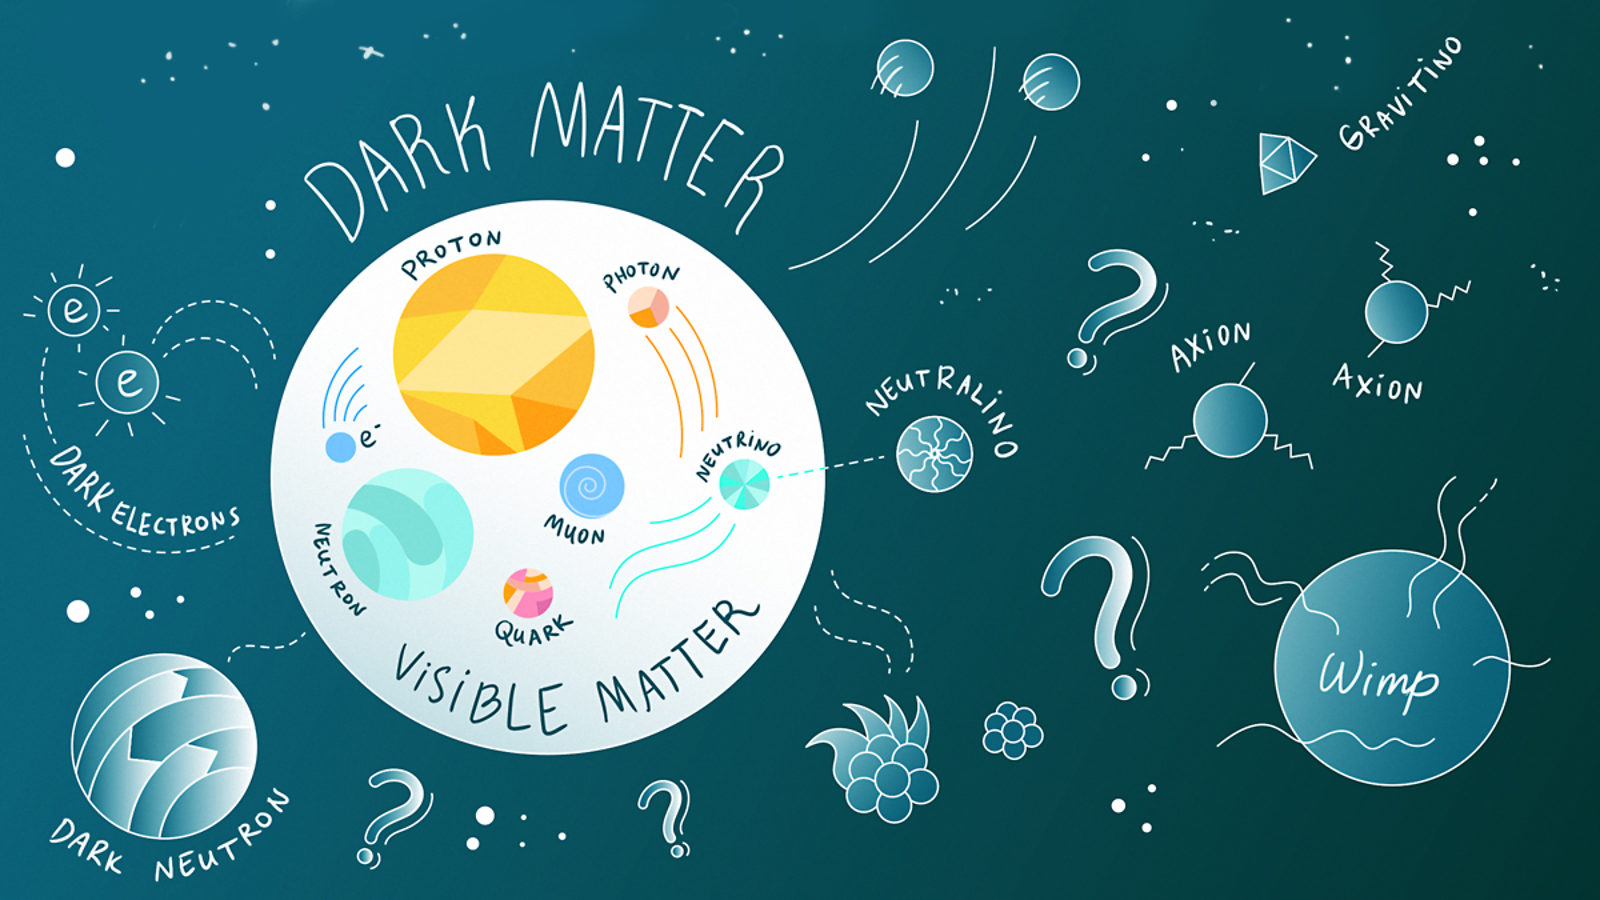 what does matter mean